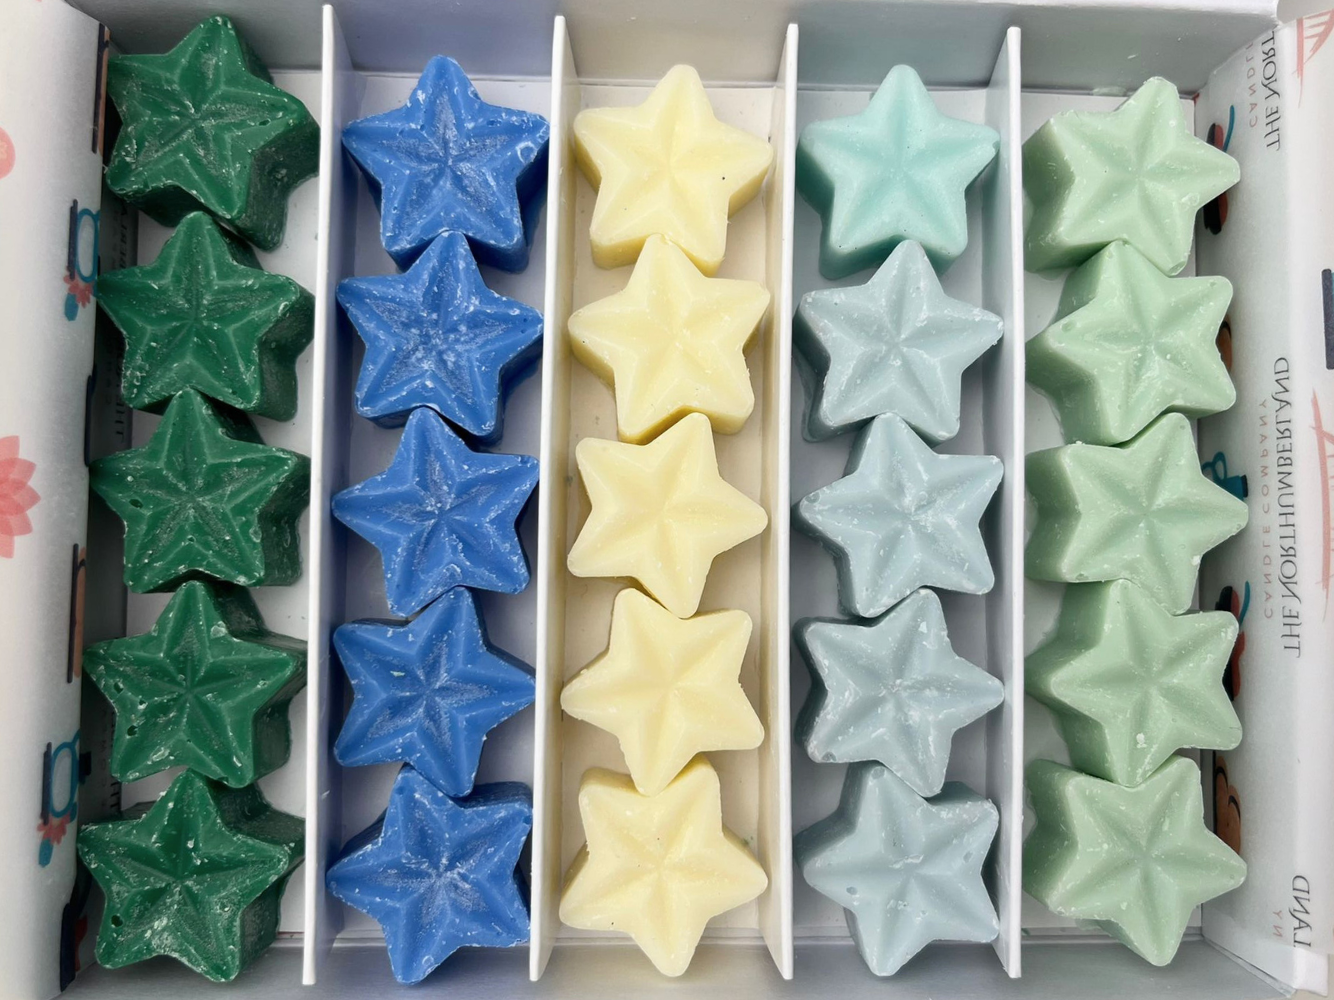 Spa/Relaxation Wax Melt Selection Box